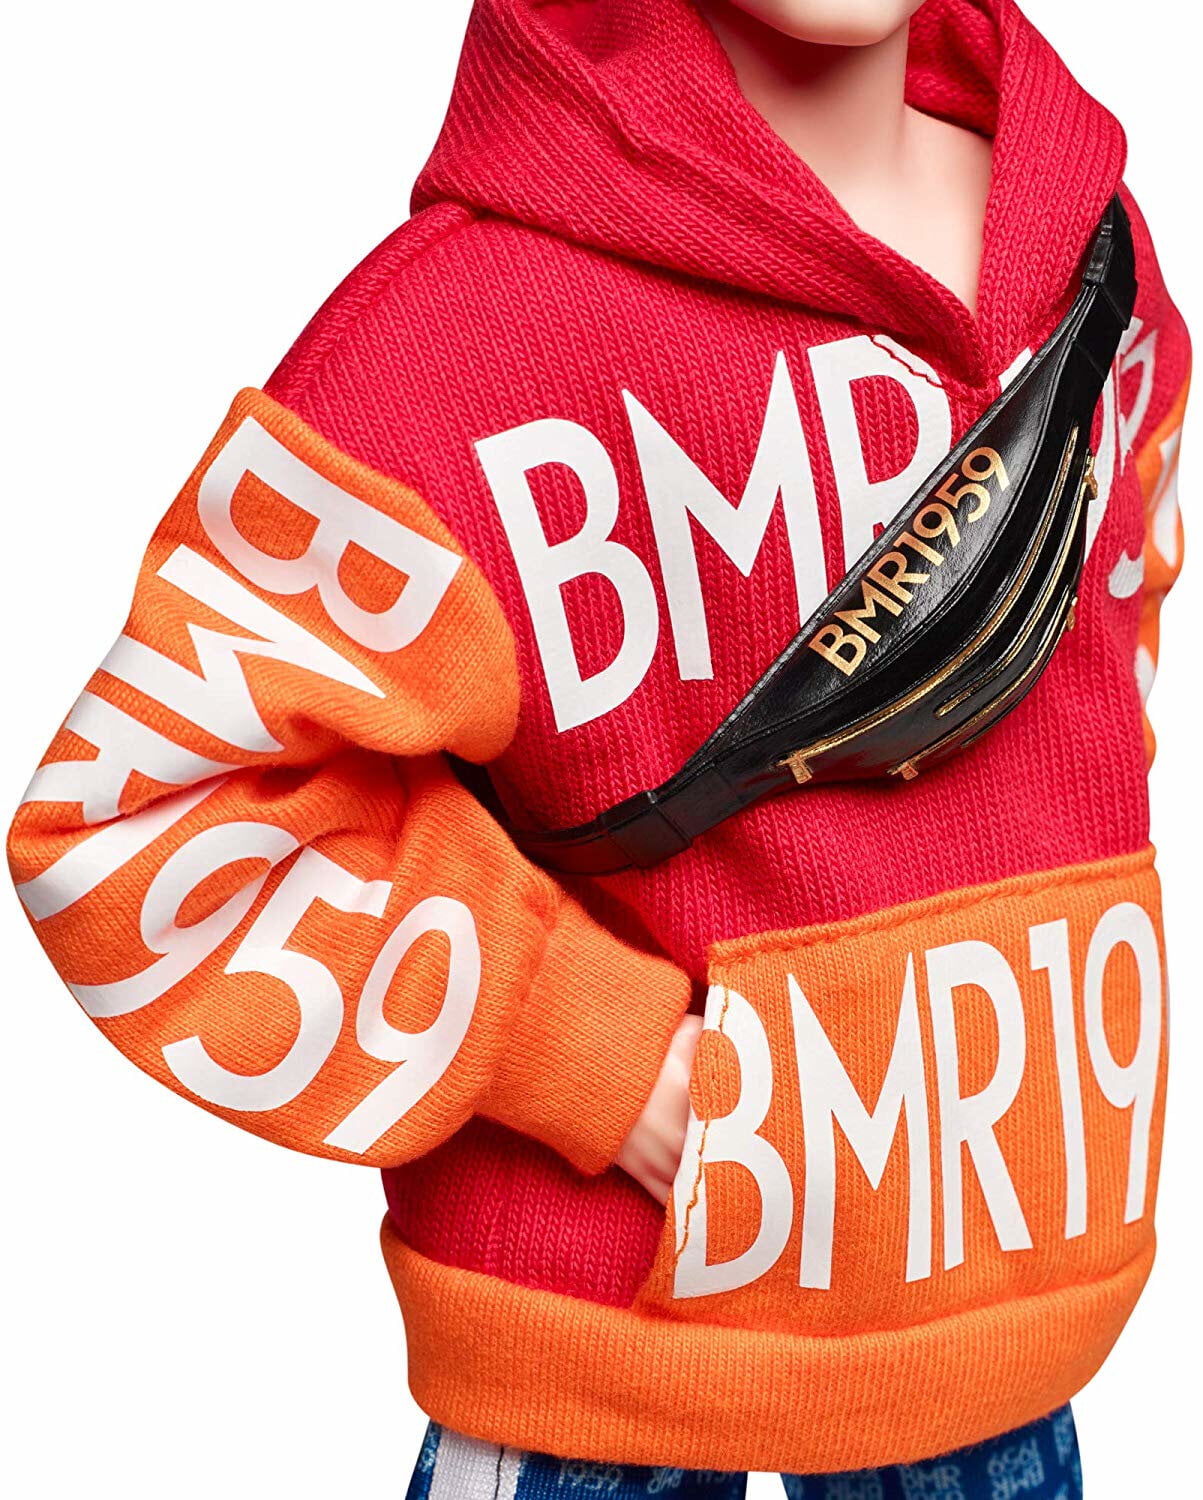 Barbie BMR1959 Bold Logo Hoodie and Basketball Shorts Kid Toy Gift 